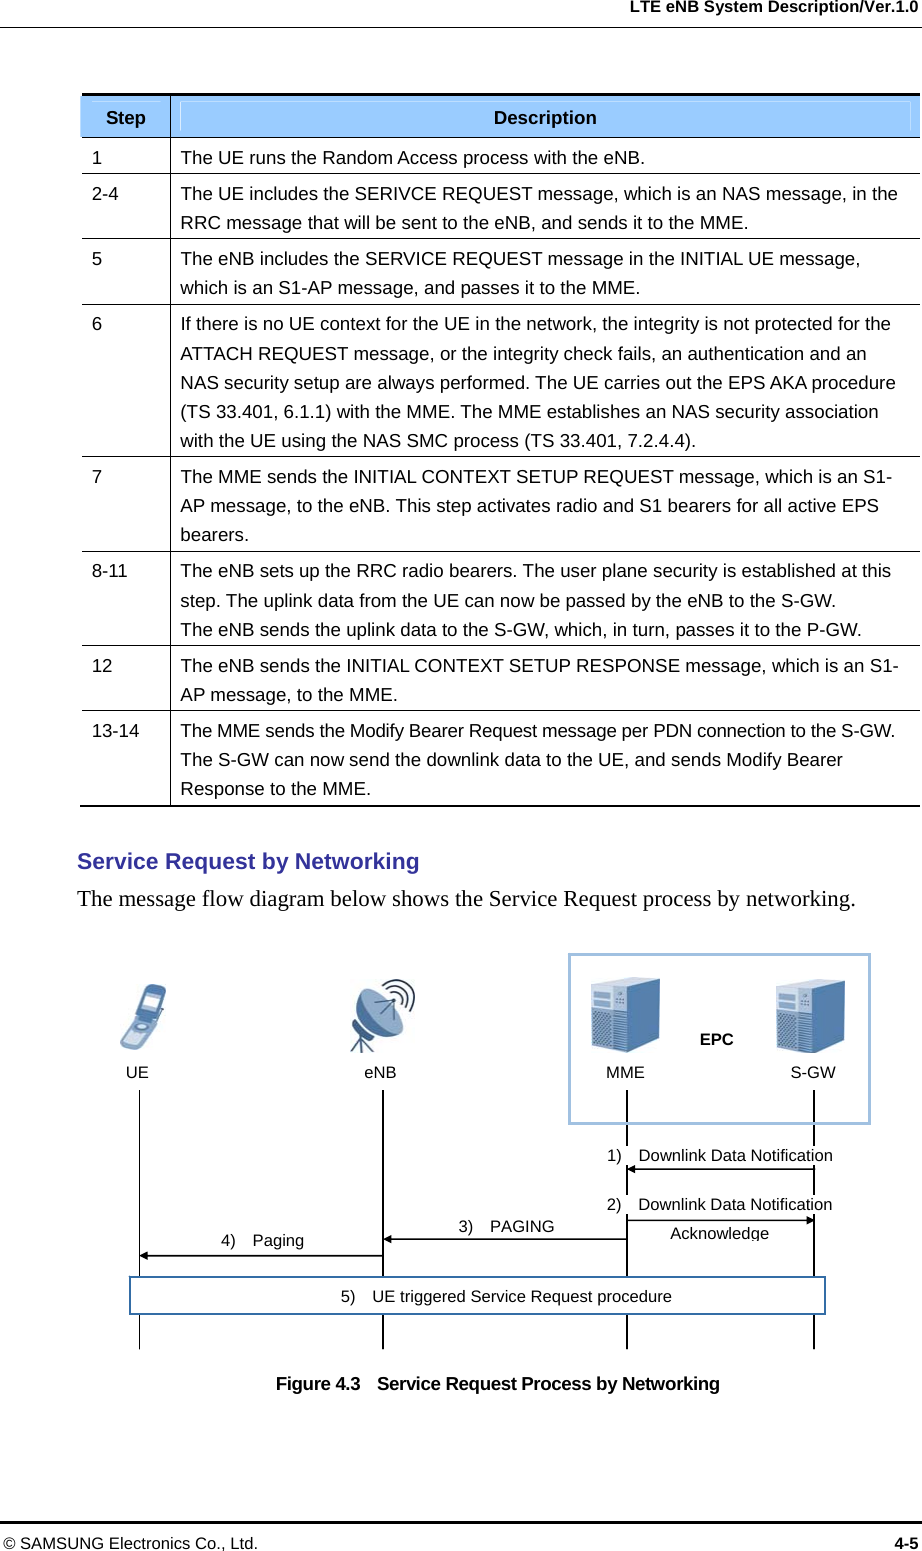  LTE eNB System Description/Ver.1.0  Step  Description 1  The UE runs the Random Access process with the eNB. 2-4  The UE includes the SERIVCE REQUEST message, which is an NAS message, in the RRC message that will be sent to the eNB, and sends it to the MME. 5  The eNB includes the SERVICE REQUEST message in the INITIAL UE message, which is an S1-AP message, and passes it to the MME. 6  If there is no UE context for the UE in the network, the integrity is not protected for the ATTACH REQUEST message, or the integrity check fails, an authentication and an NAS security setup are always performed. The UE carries out the EPS AKA procedure (TS 33.401, 6.1.1) with the MME. The MME establishes an NAS security association with the UE using the NAS SMC process (TS 33.401, 7.2.4.4). 7  The MME sends the INITIAL CONTEXT SETUP REQUEST message, which is an S1-AP message, to the eNB. This step activates radio and S1 bearers for all active EPS bearers. 8-11  The eNB sets up the RRC radio bearers. The user plane security is established at this step. The uplink data from the UE can now be passed by the eNB to the S-GW.   The eNB sends the uplink data to the S-GW, which, in turn, passes it to the P-GW. 12  The eNB sends the INITIAL CONTEXT SETUP RESPONSE message, which is an S1-AP message, to the MME. 13-14  The MME sends the Modify Bearer Request message per PDN connection to the S-GW. The S-GW can now send the downlink data to the UE, and sends Modify Bearer Response to the MME.  Service Request by Networking The message flow diagram below shows the Service Request process by networking.  UE  eNB EPC 3)  PAGING Acknowledge 1)  Downlink Data Notification S-GW MME 2)  Downlink Data Notification 4)  Paging 5)    UE triggered Service Request procedure Figure 4.3    Service Request Process by Networking © SAMSUNG Electronics Co., Ltd.  4-5 